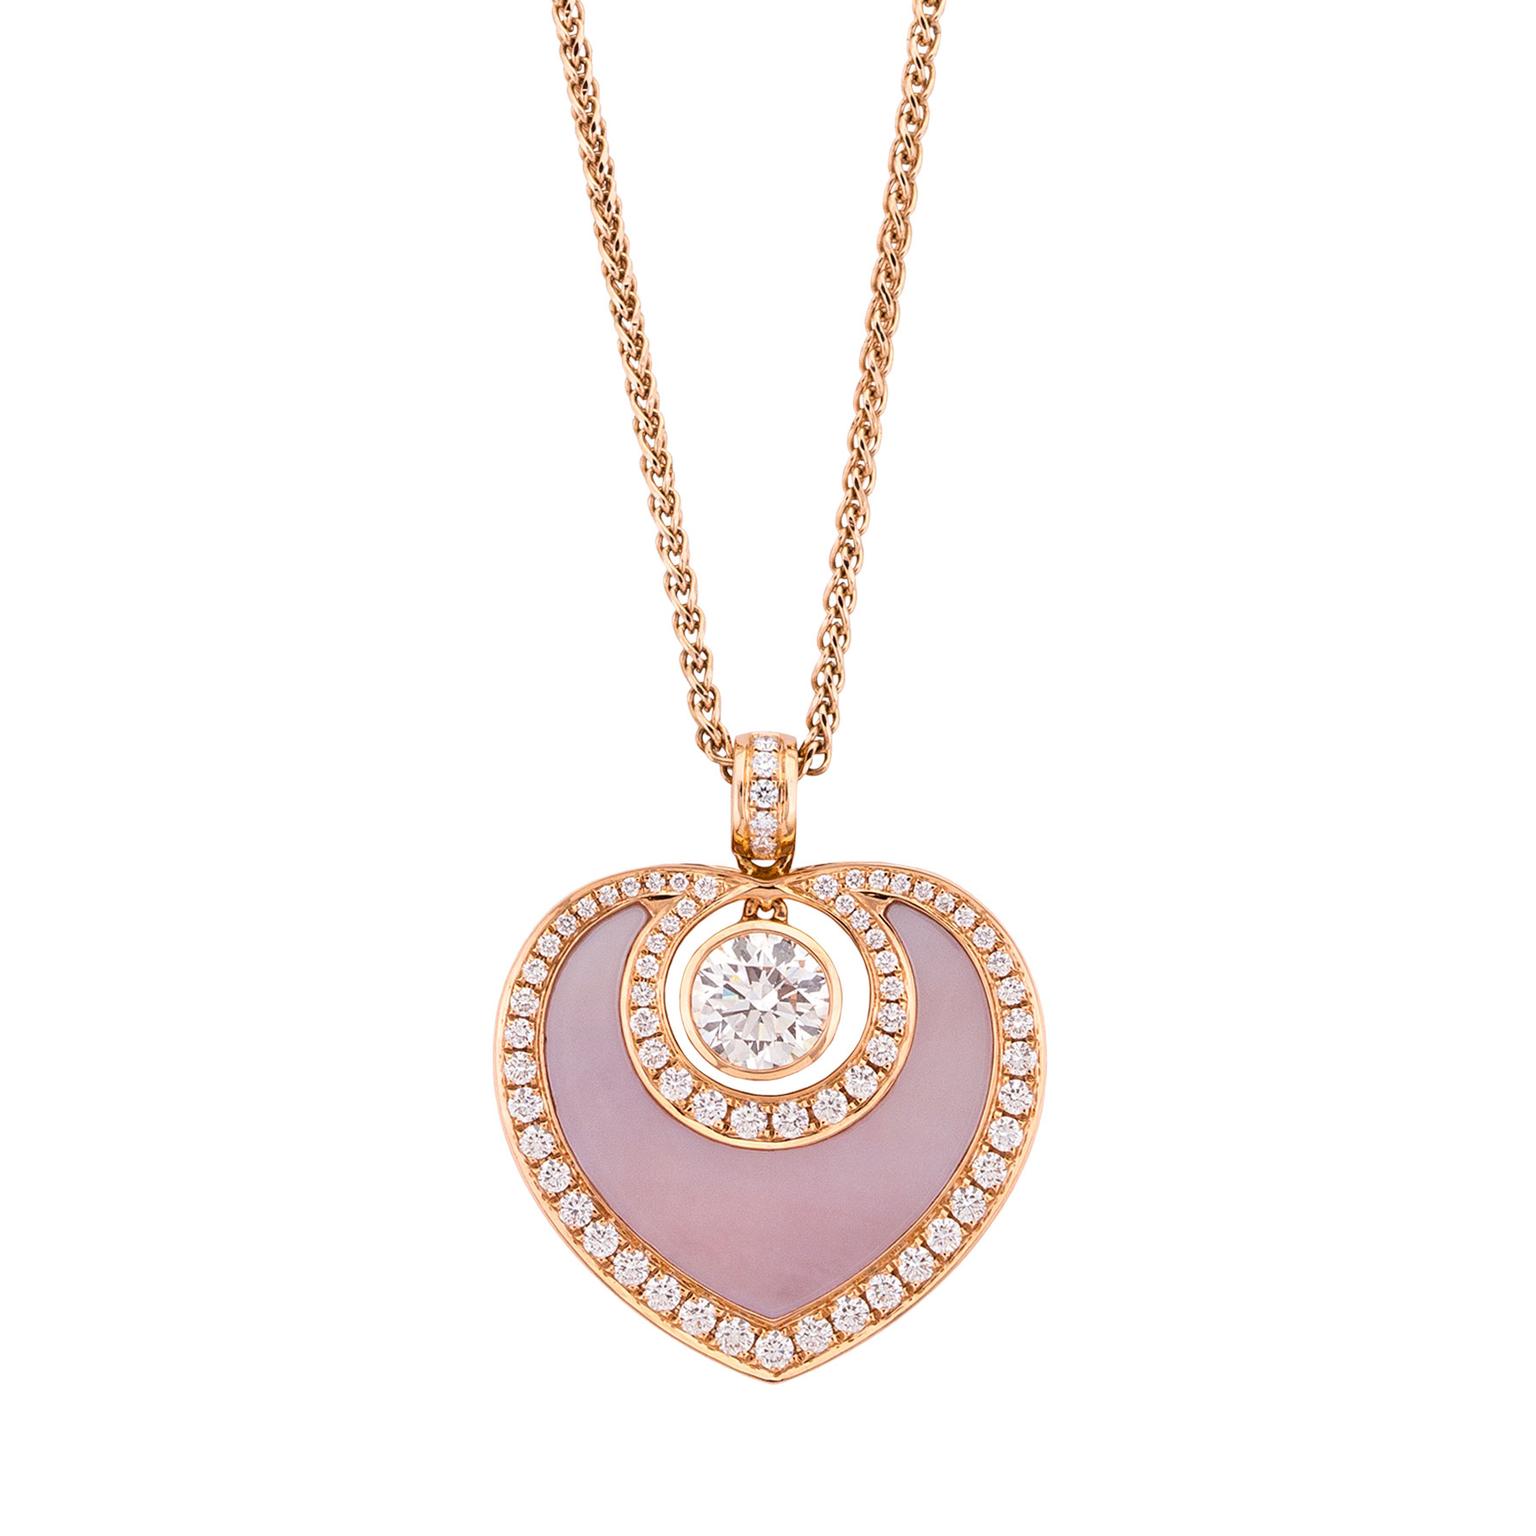 Boodles Sophie pendant in rose gold, diamond and mother-of-pearl